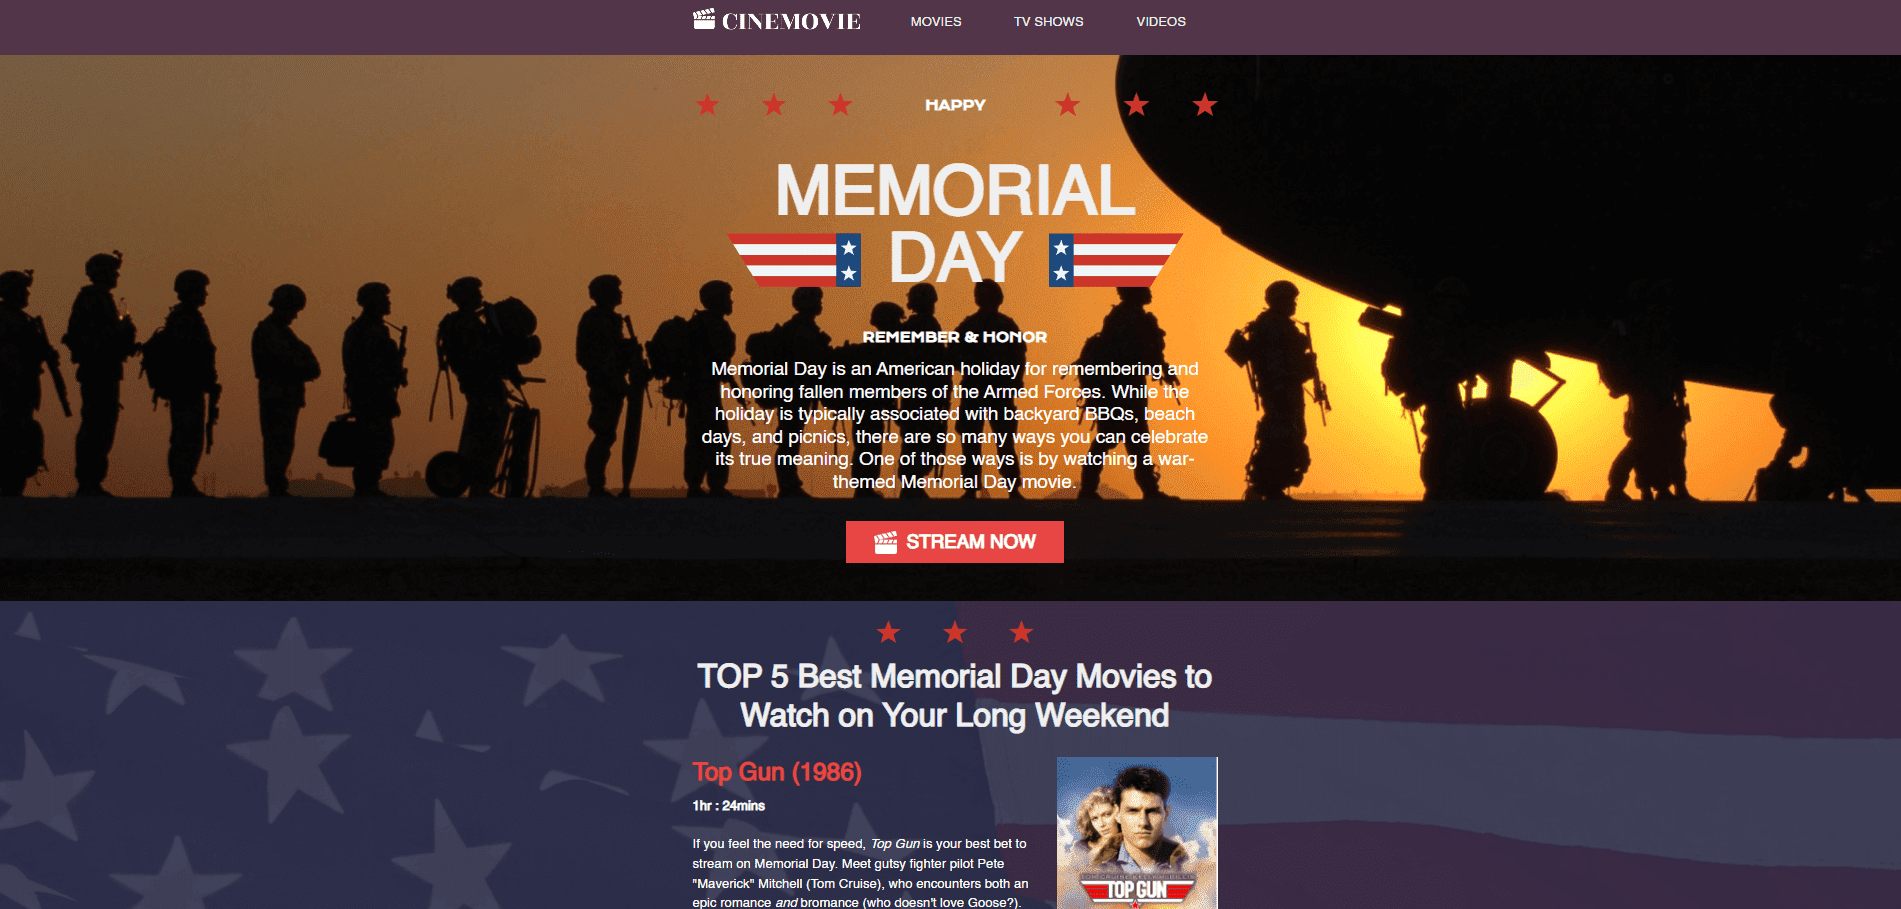 Eye-Catching Images in Memorial Day Emails